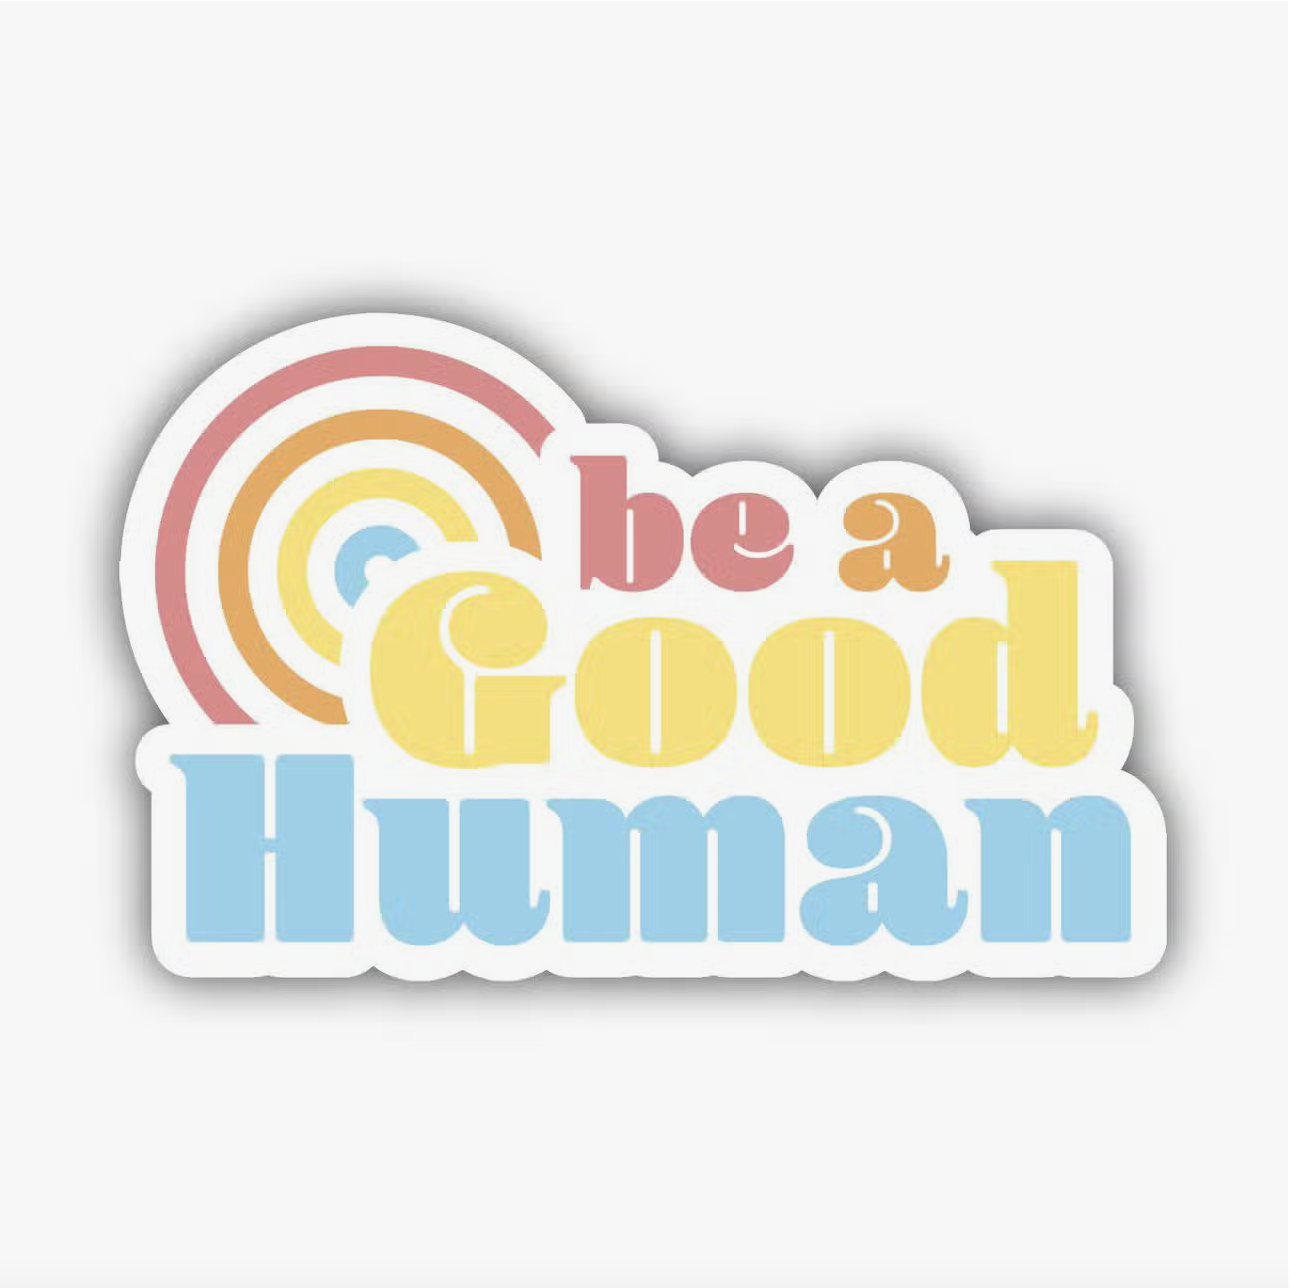 "Be a Good Human" Vinyl Sticker - Heart of the Home LV